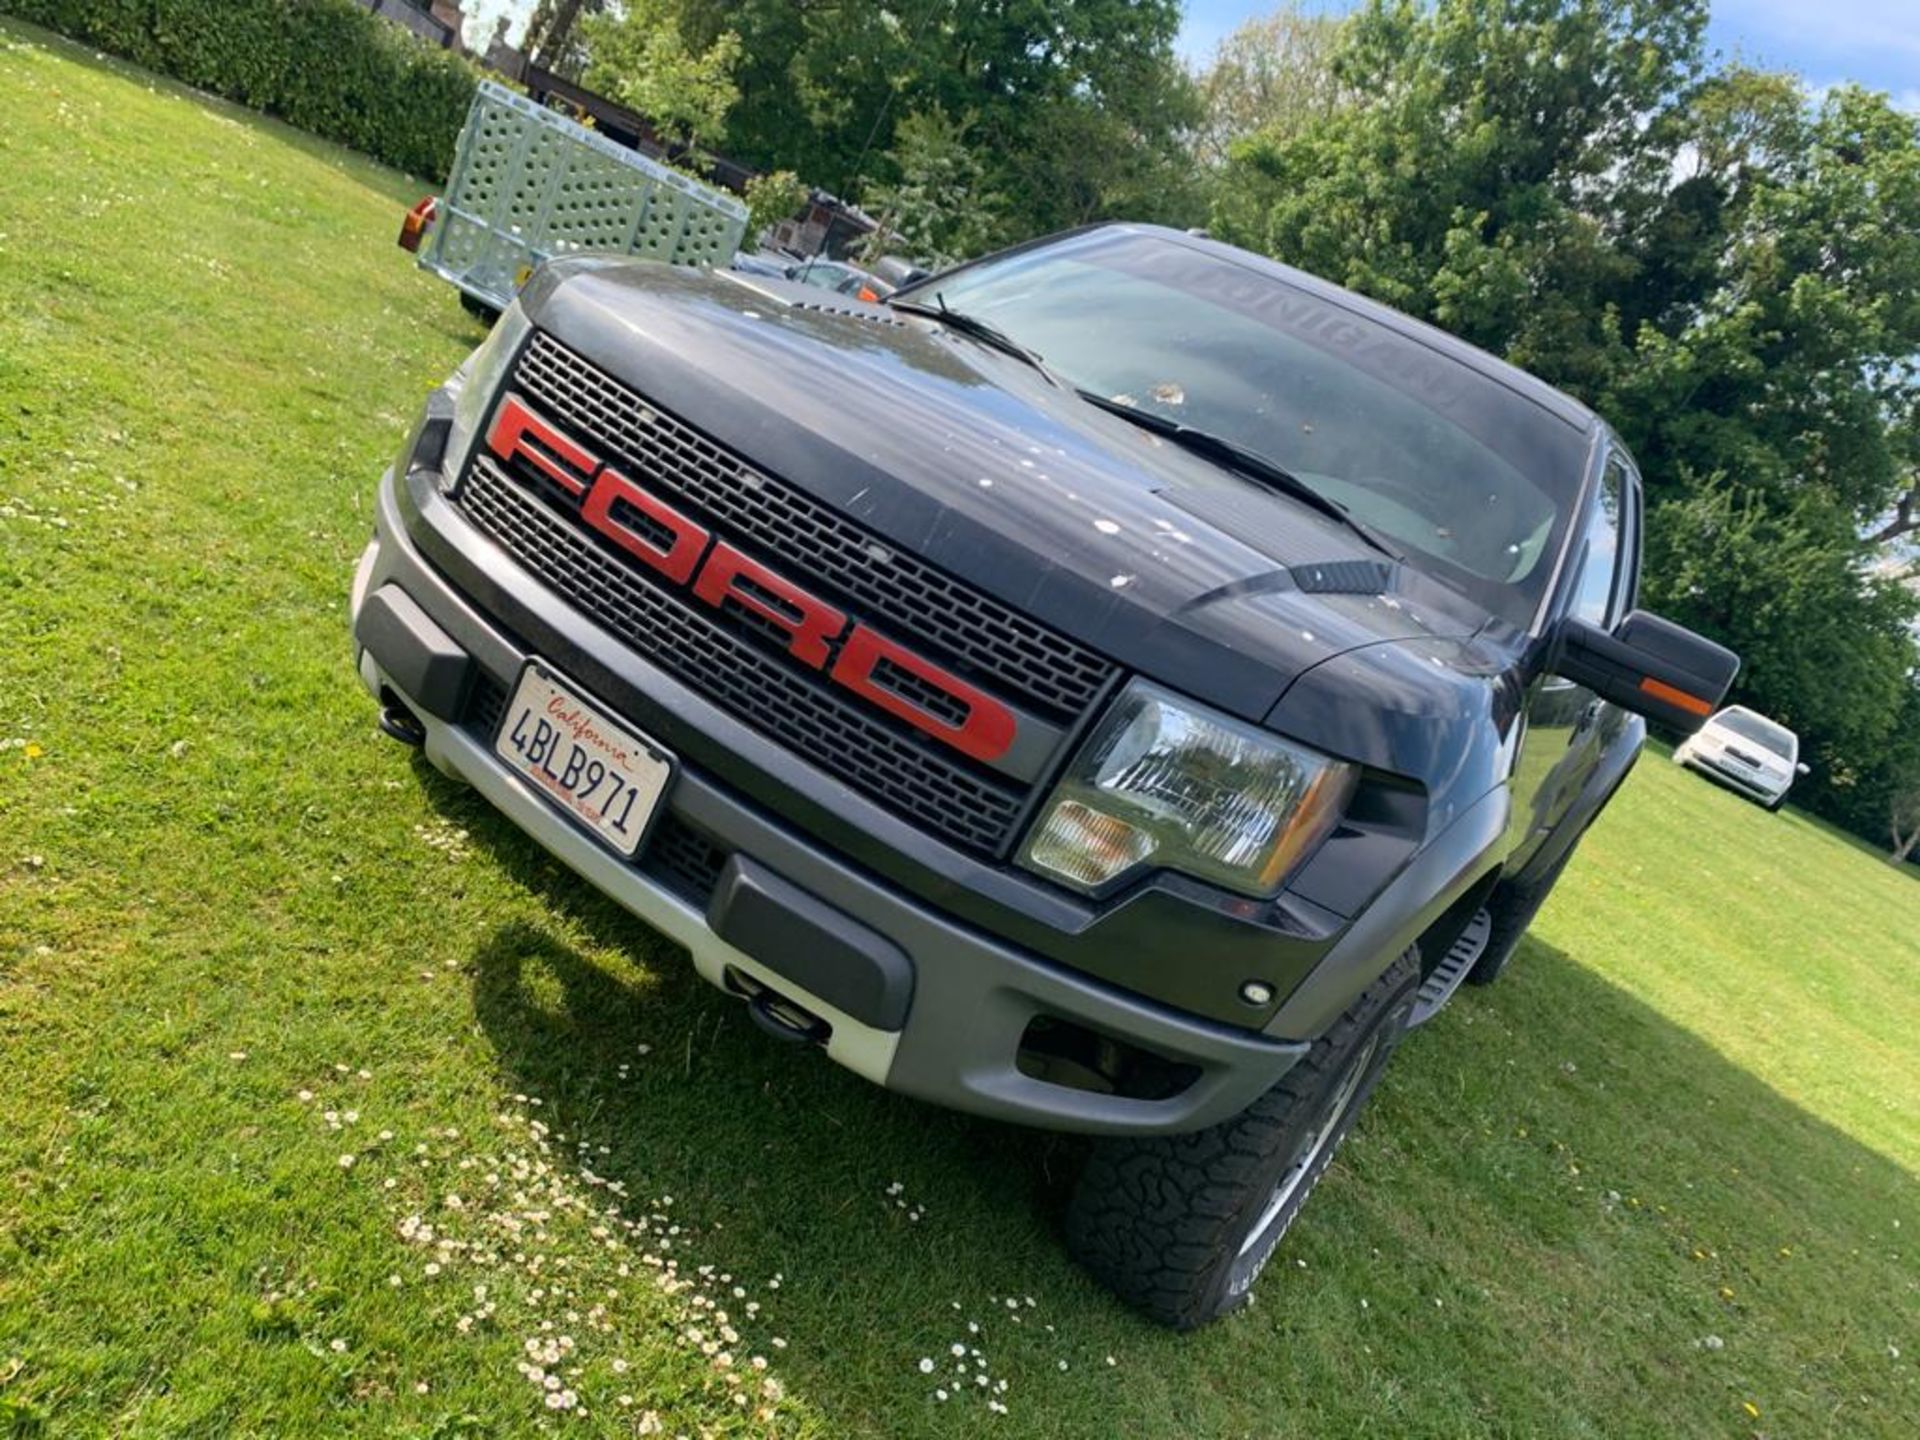 2012 FORD F-150 RAPTOR - 65,000 MILES, LOTS OF UPGRADED PARTS, READY IN UK WITH NOVA APPLICATION - Image 3 of 18